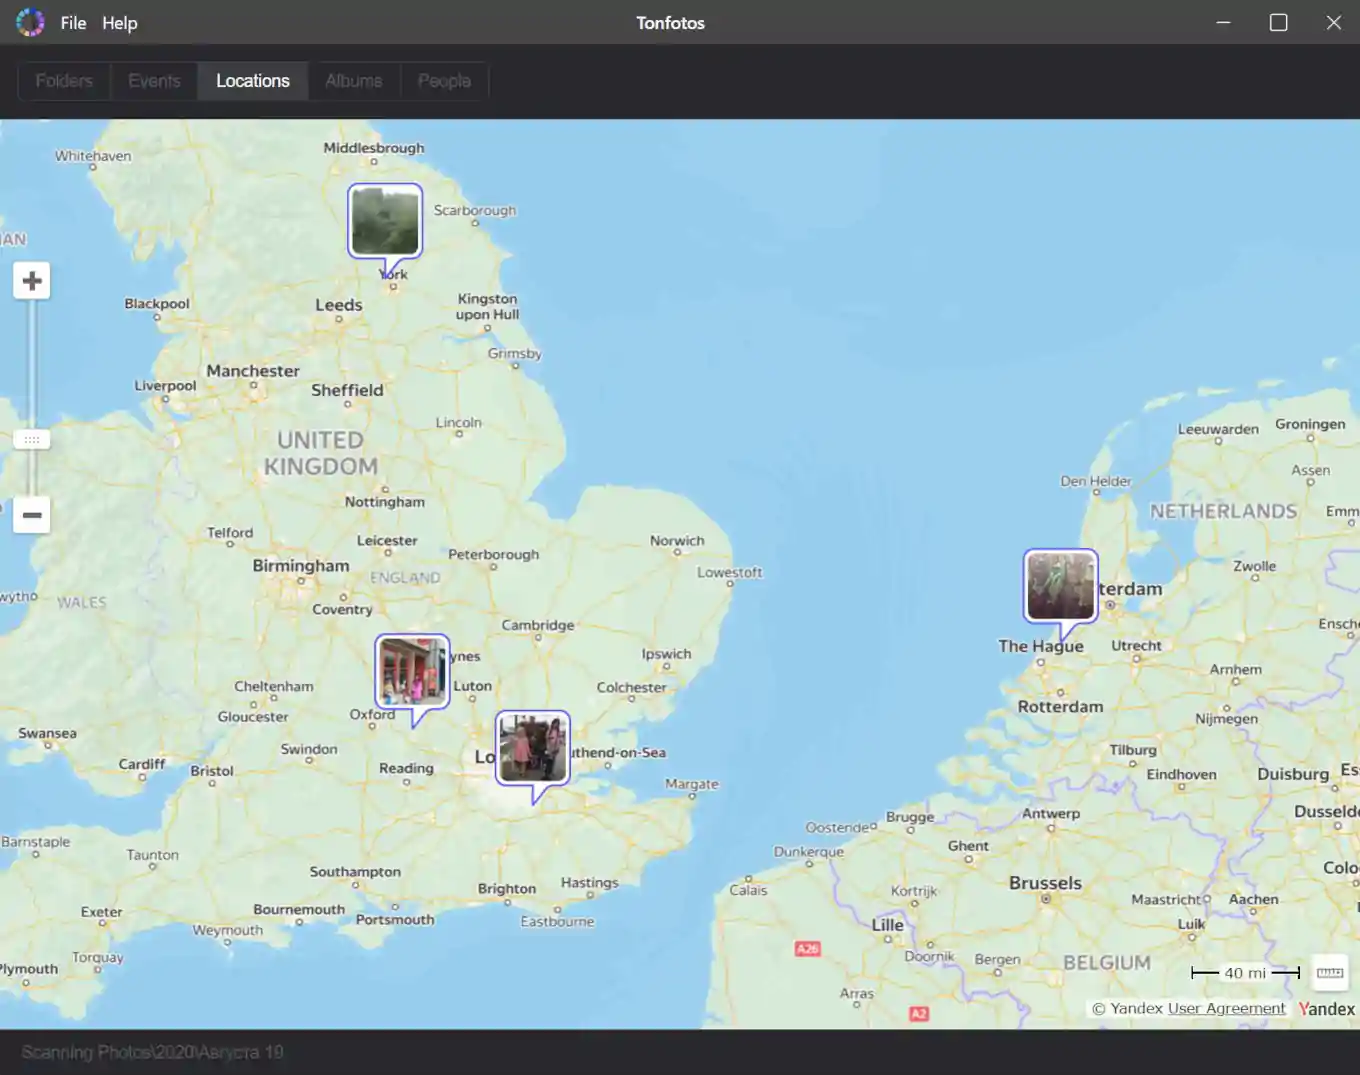 Displaying events on the UK map in the Tonfotos Image Viewer app